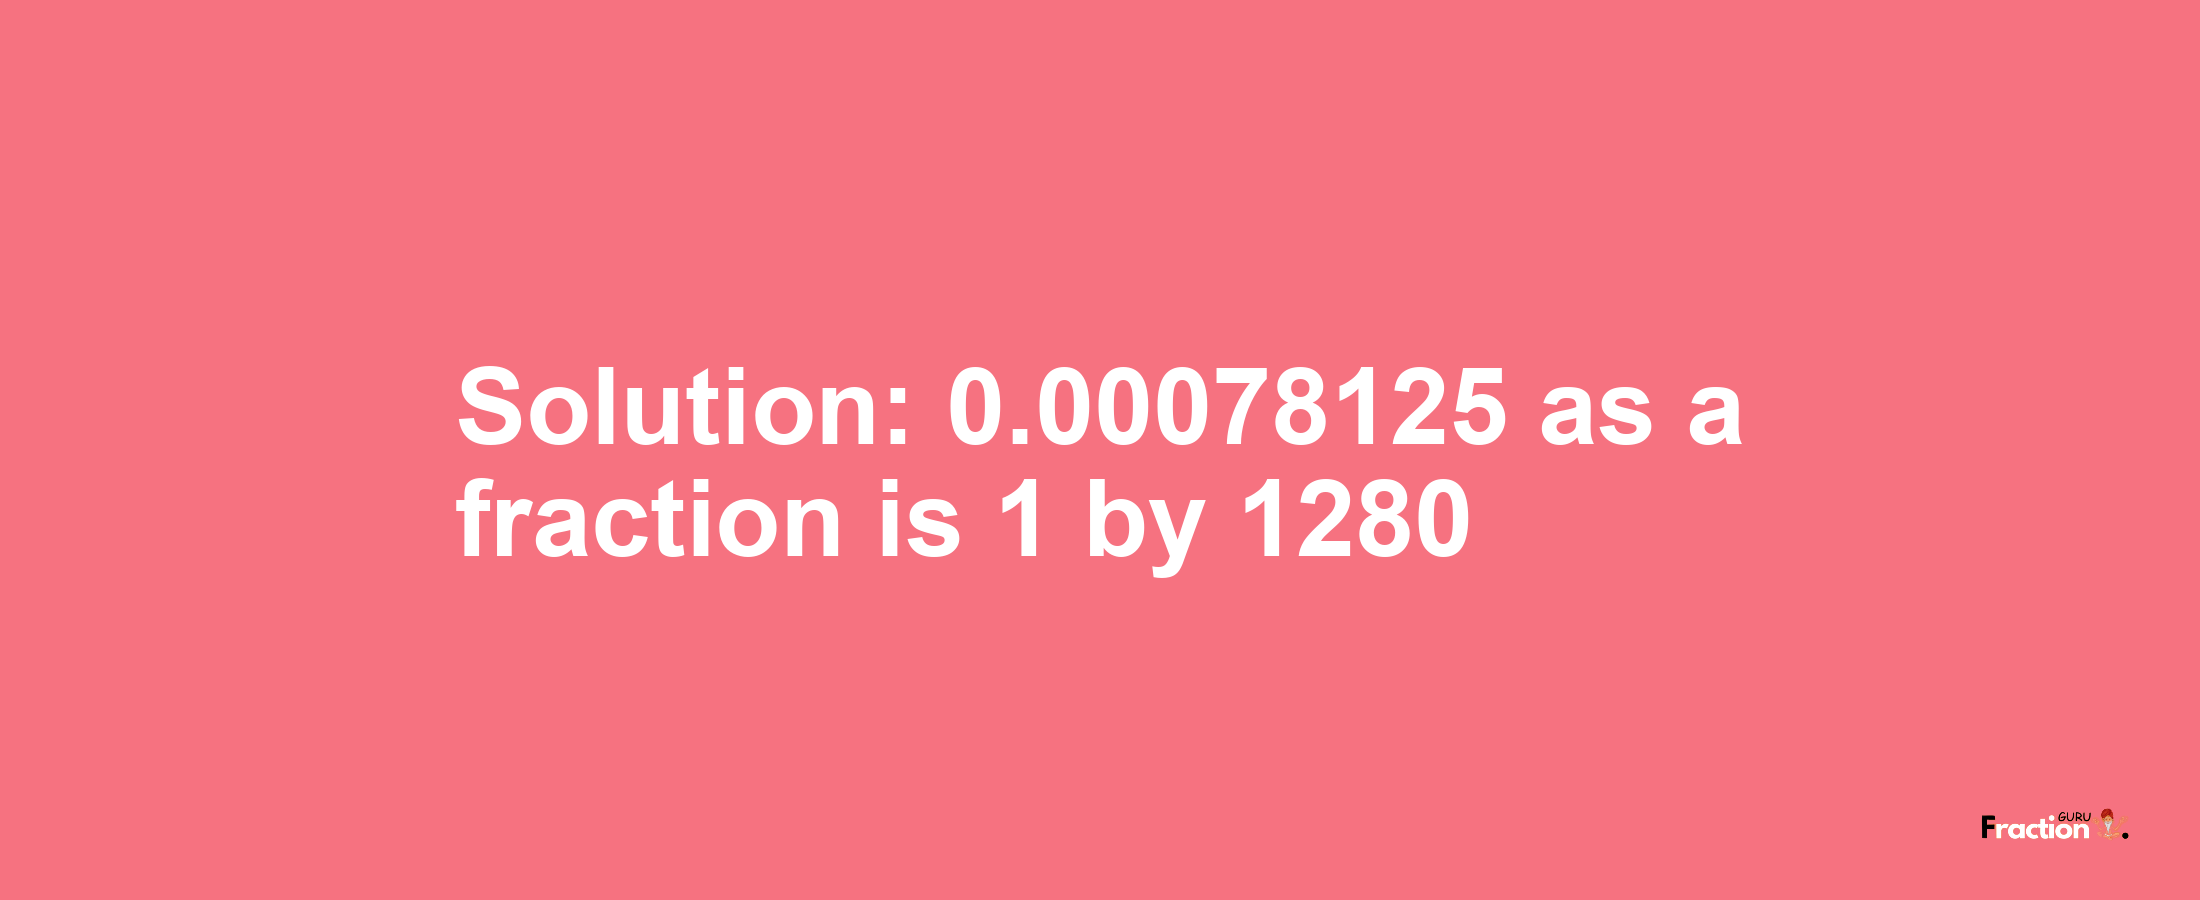 Solution:0.00078125 as a fraction is 1/1280